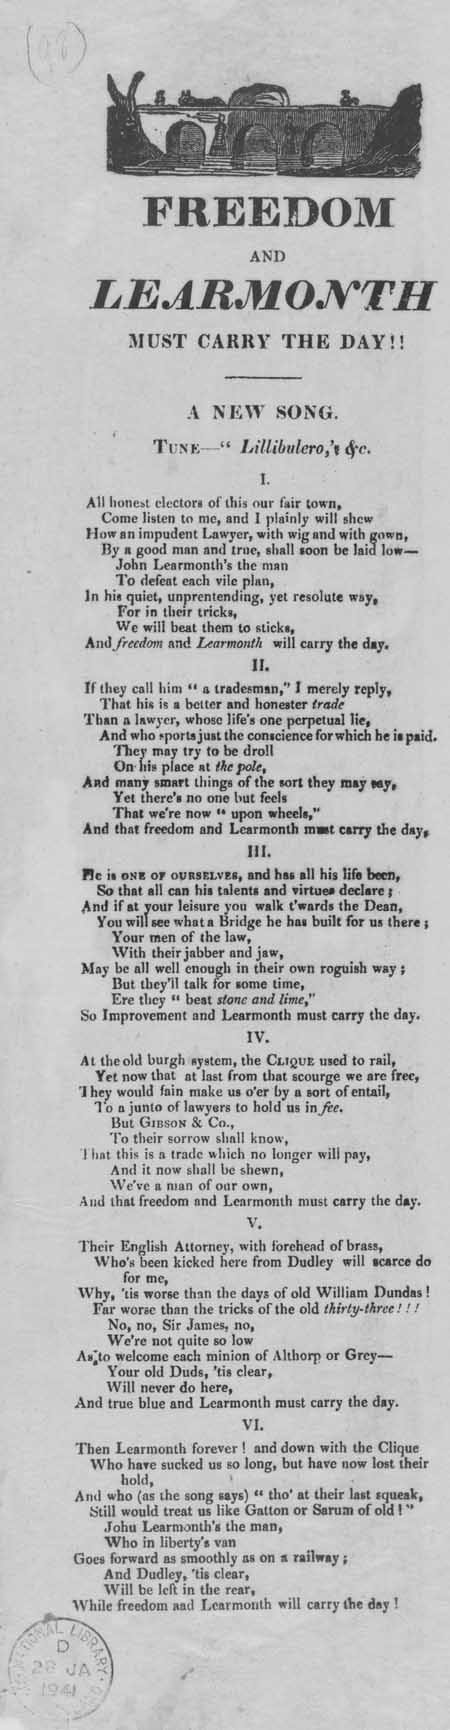 Broadside ballad entitled 'Freedom and Learmonth Must Carry the Day'